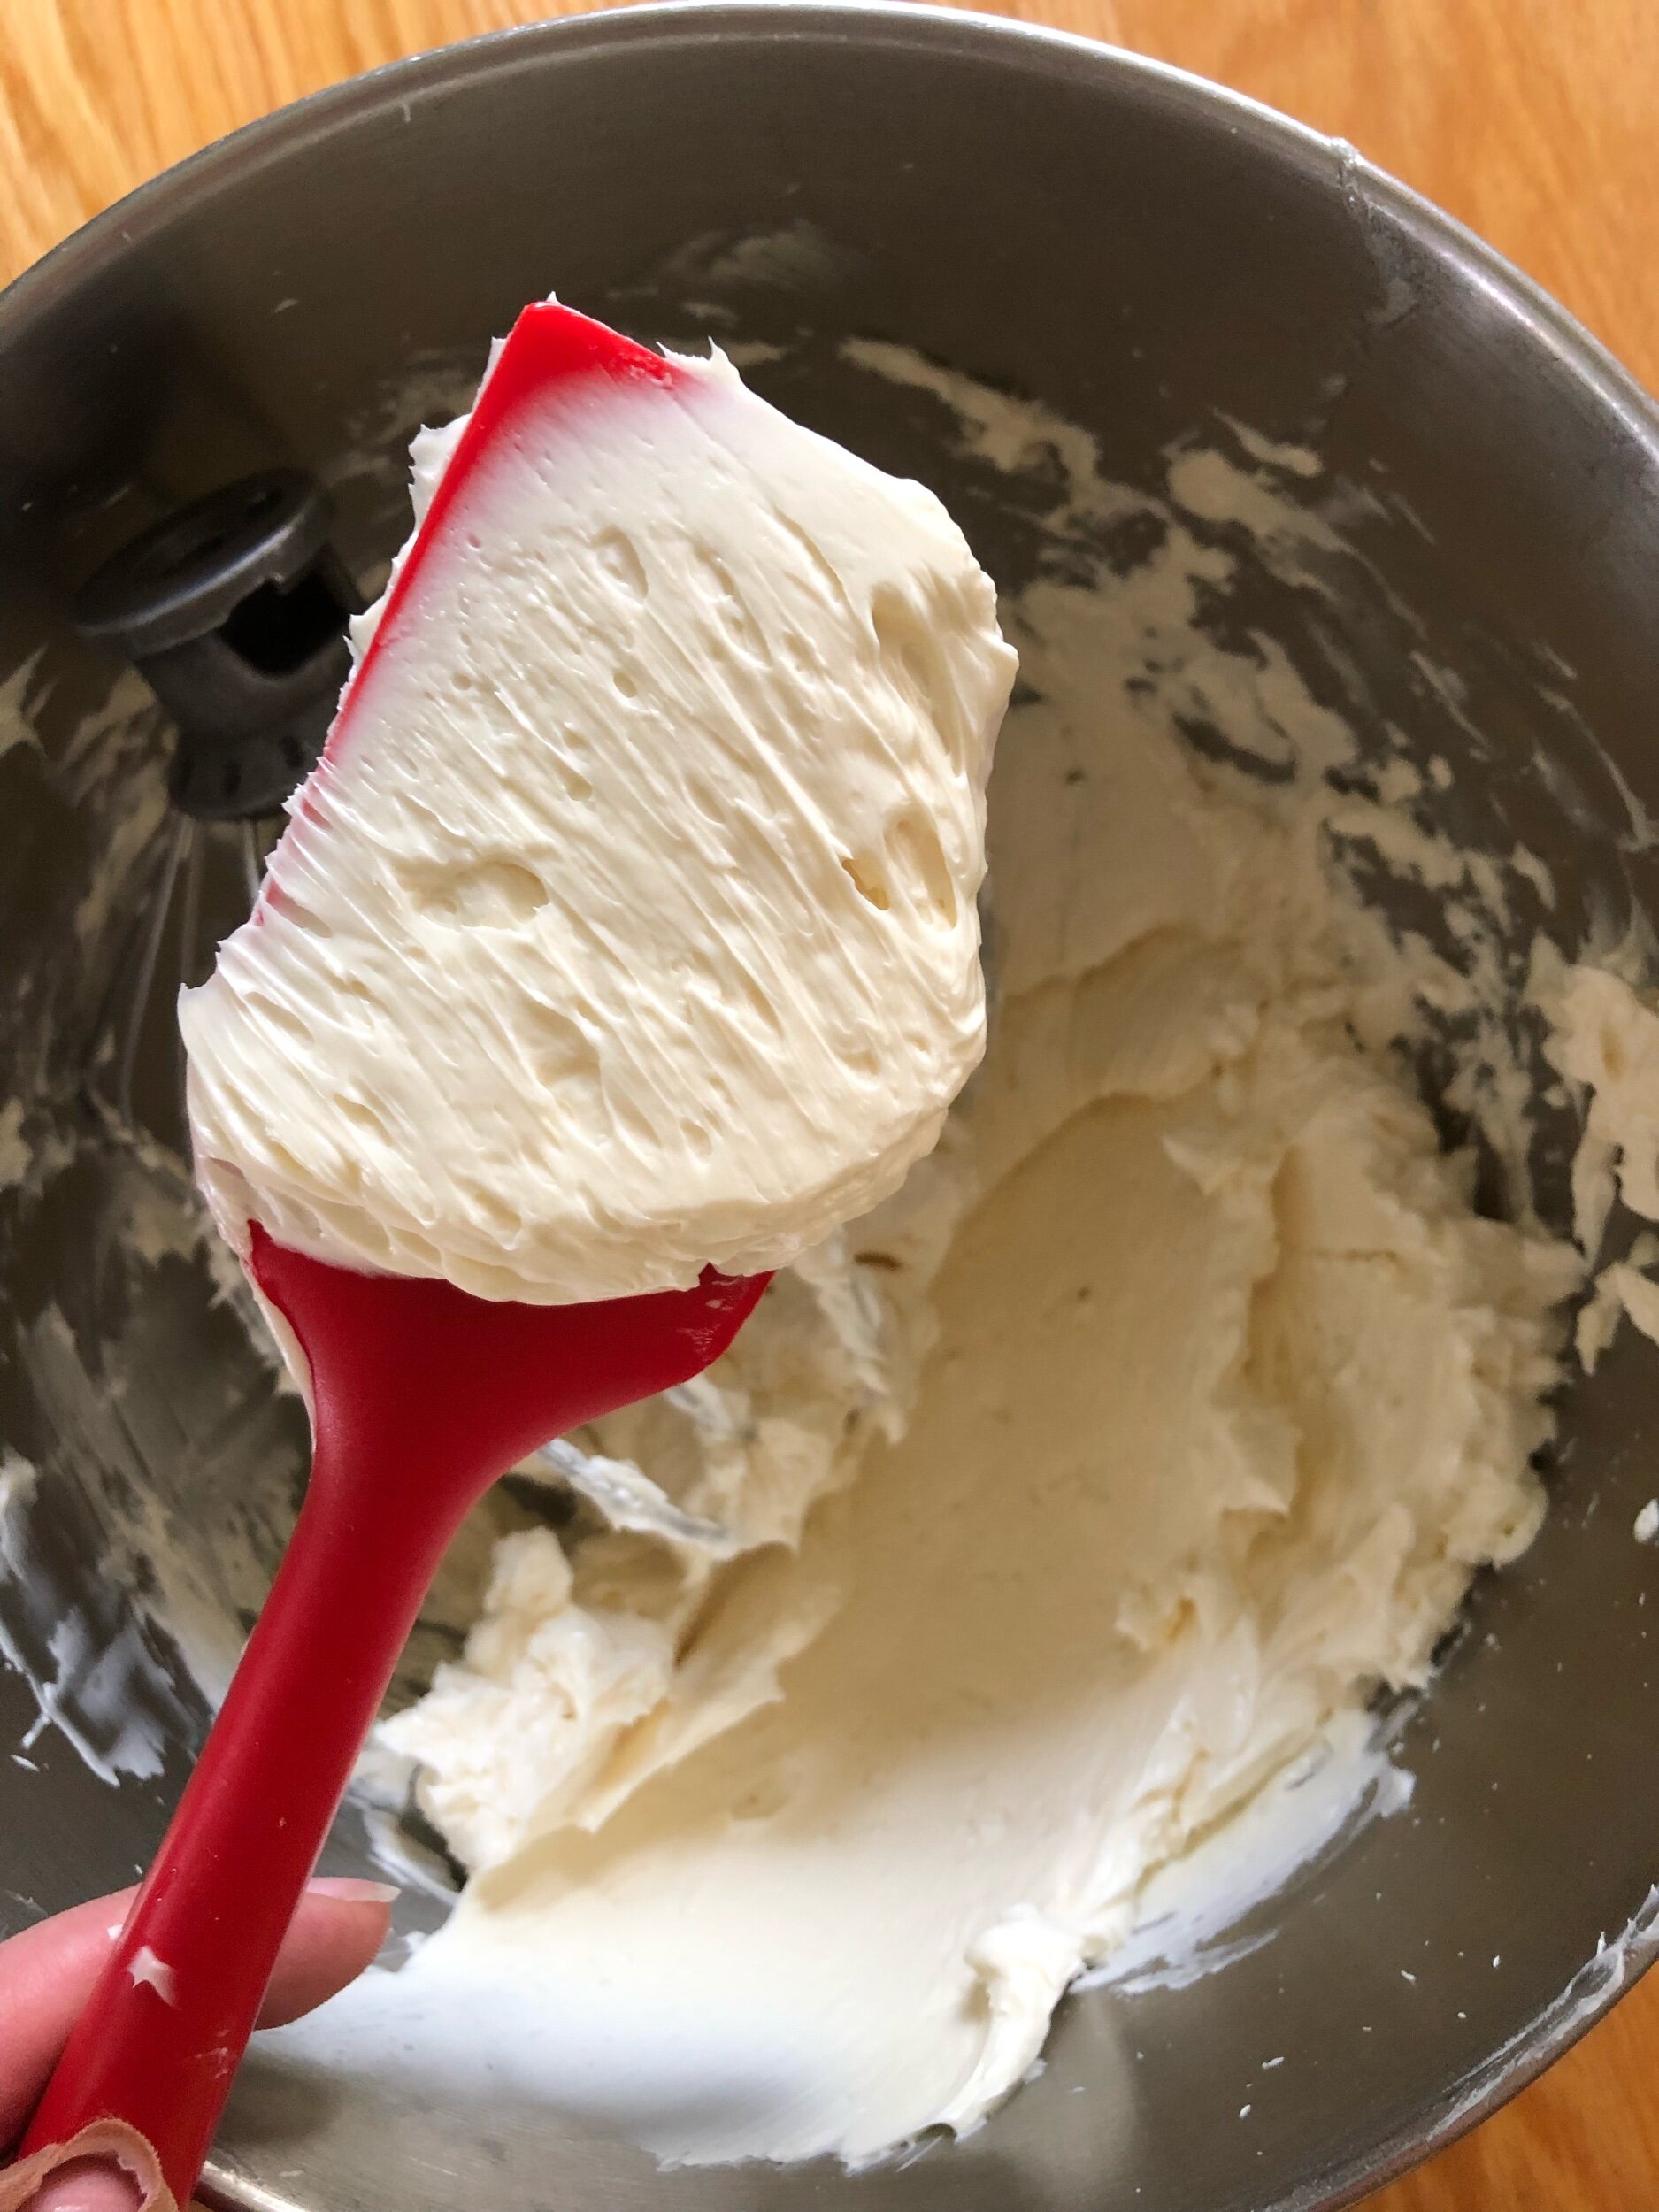  …it will come together into a luscious, creamy buttercream 